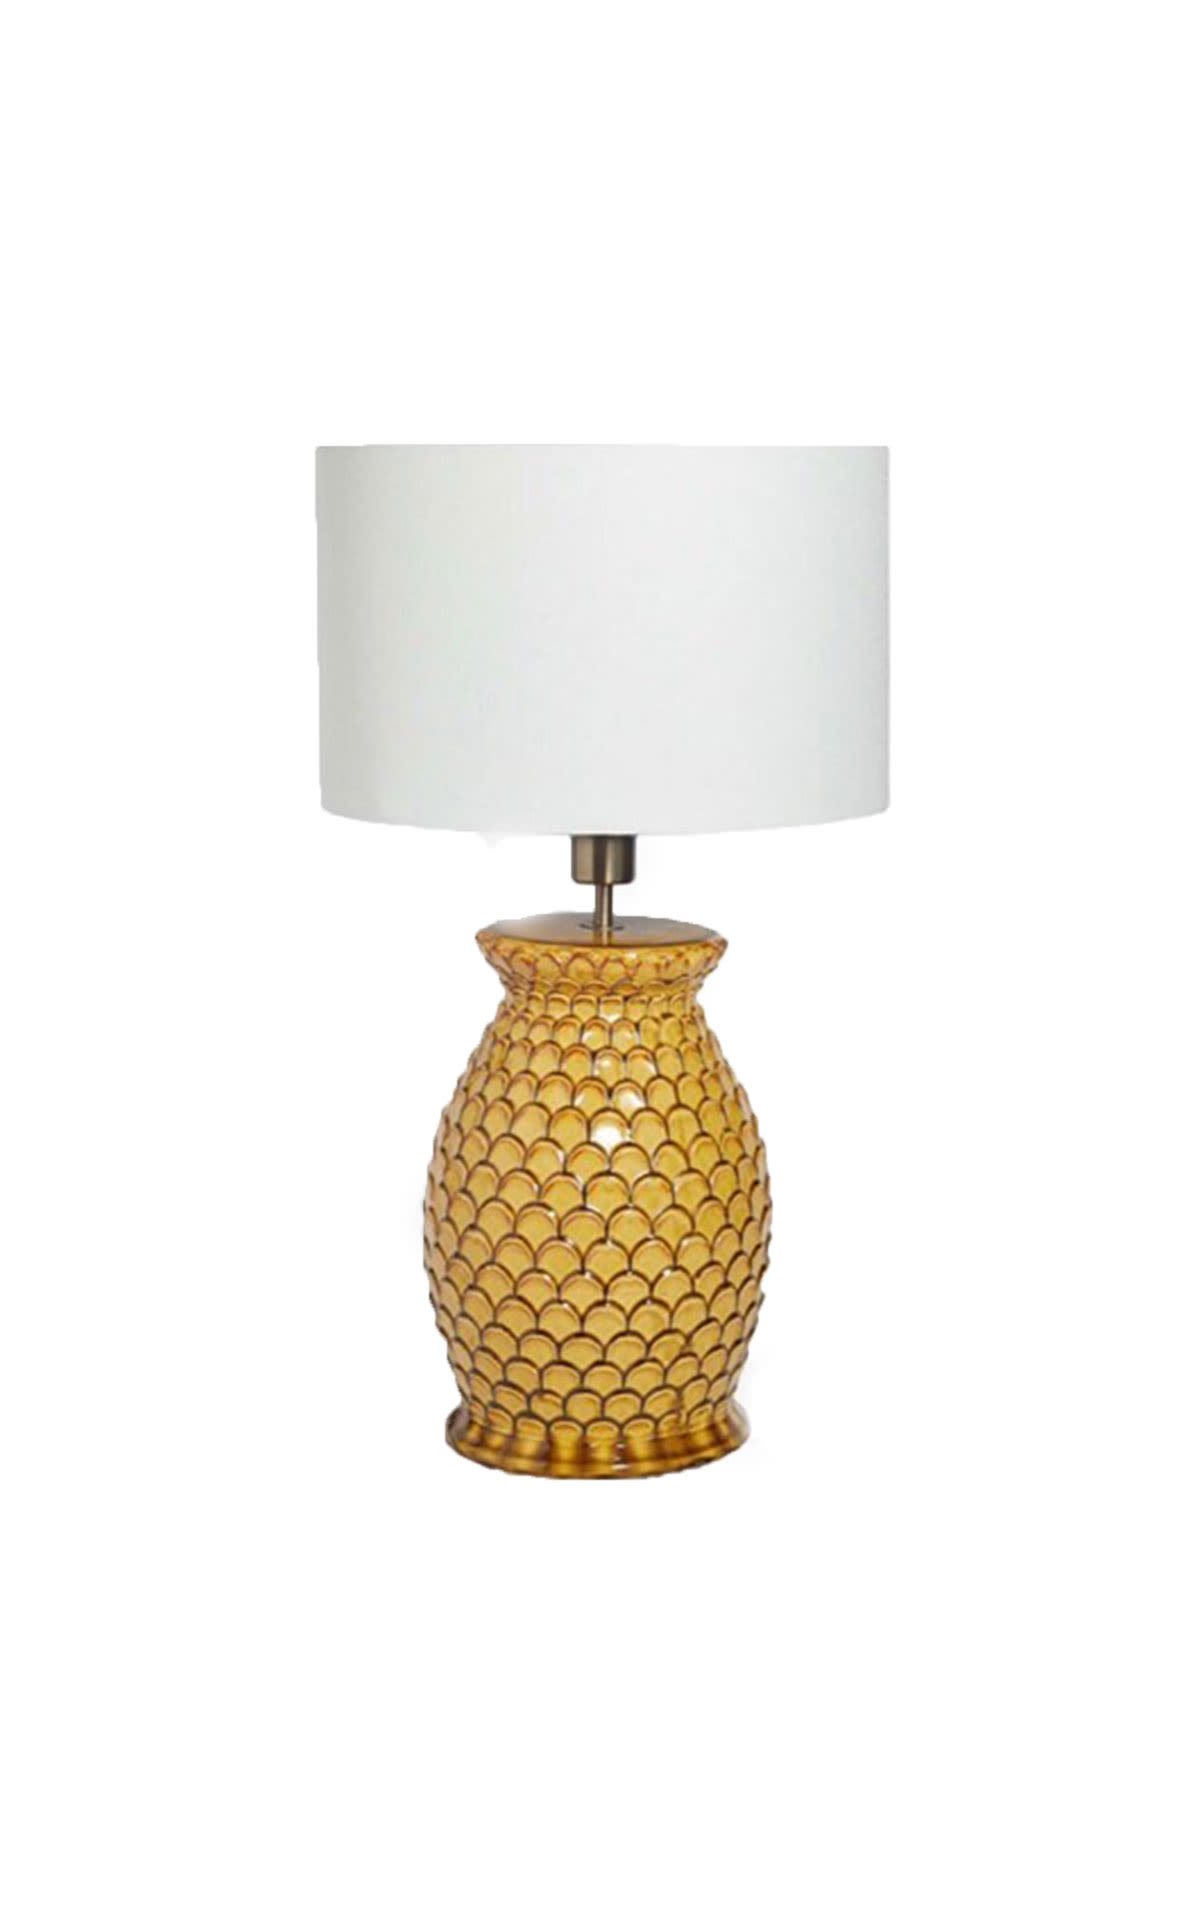 SOHO HOME Catalina table light yellow from Bicester Village